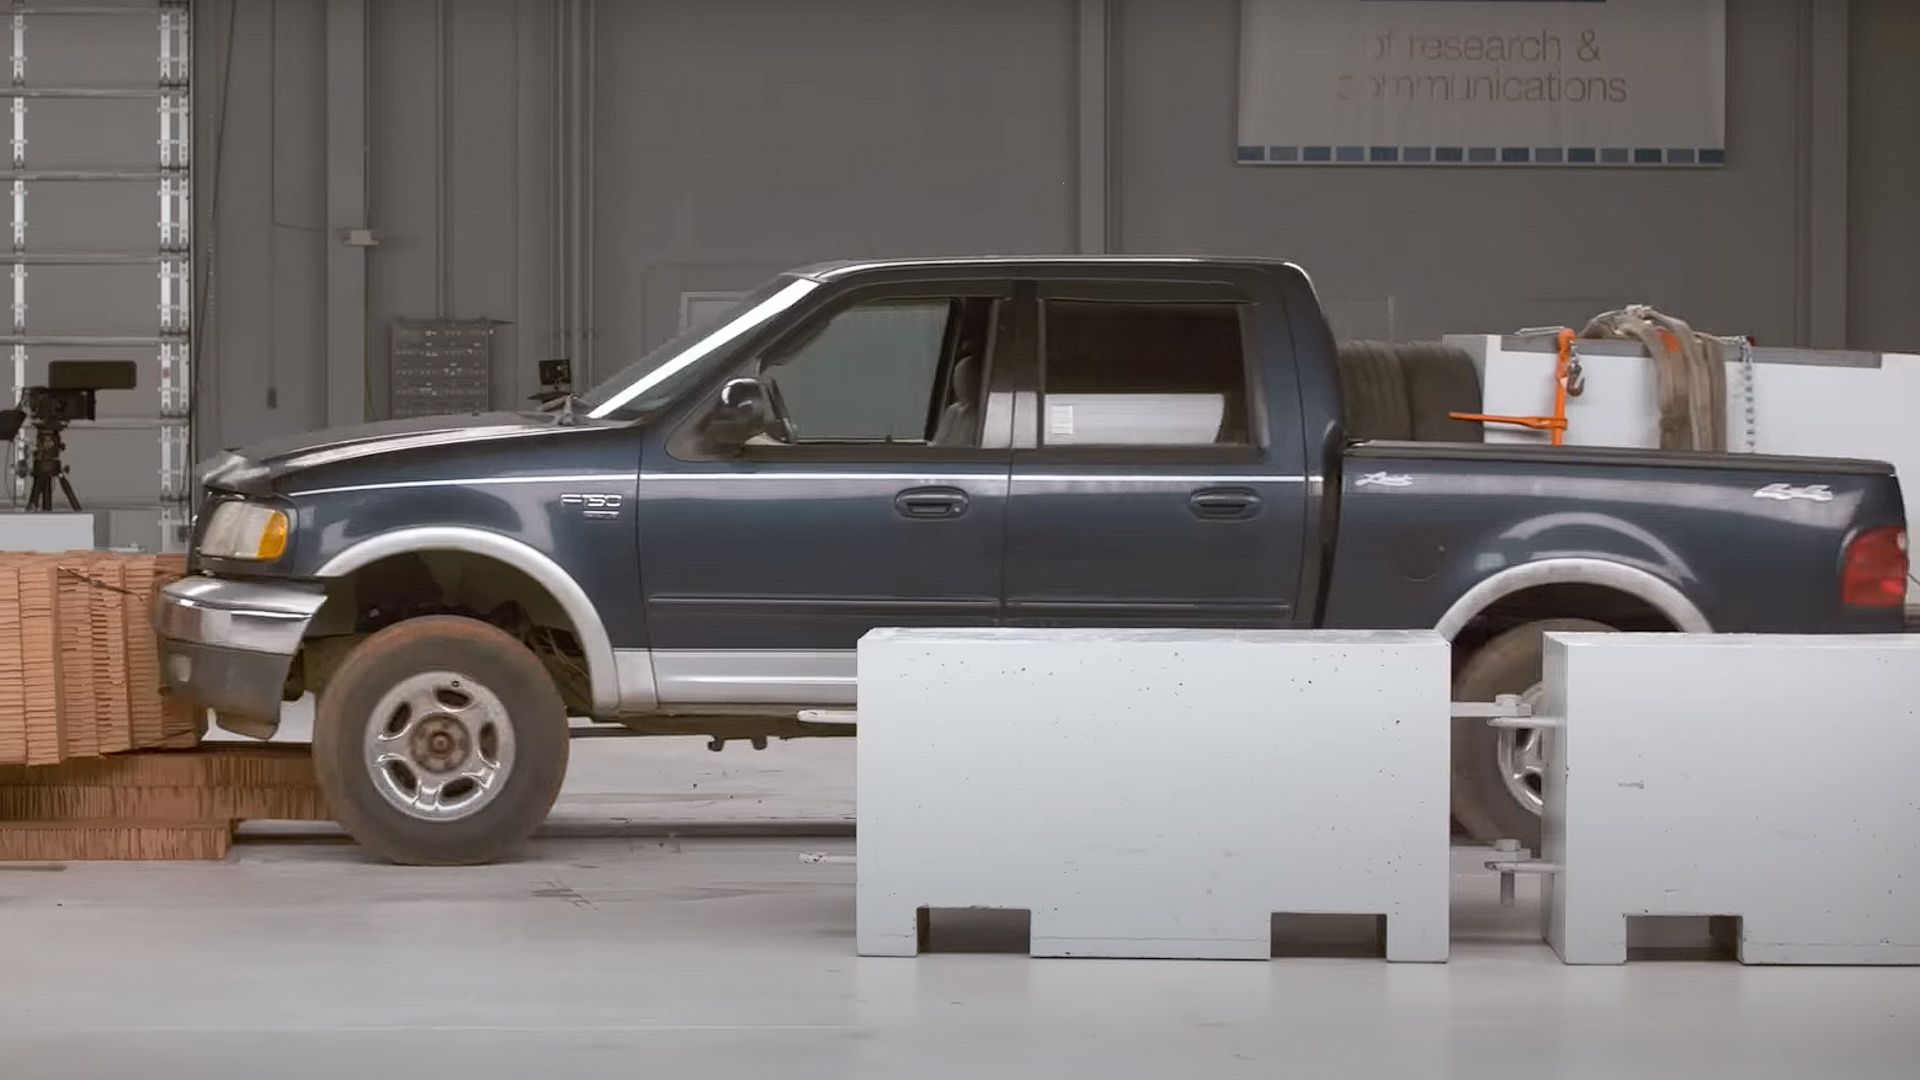 IIHS Is Prepping Its Crash Test Rig for Heavier EVs By Slamming Loaded Pickups Into the Wall